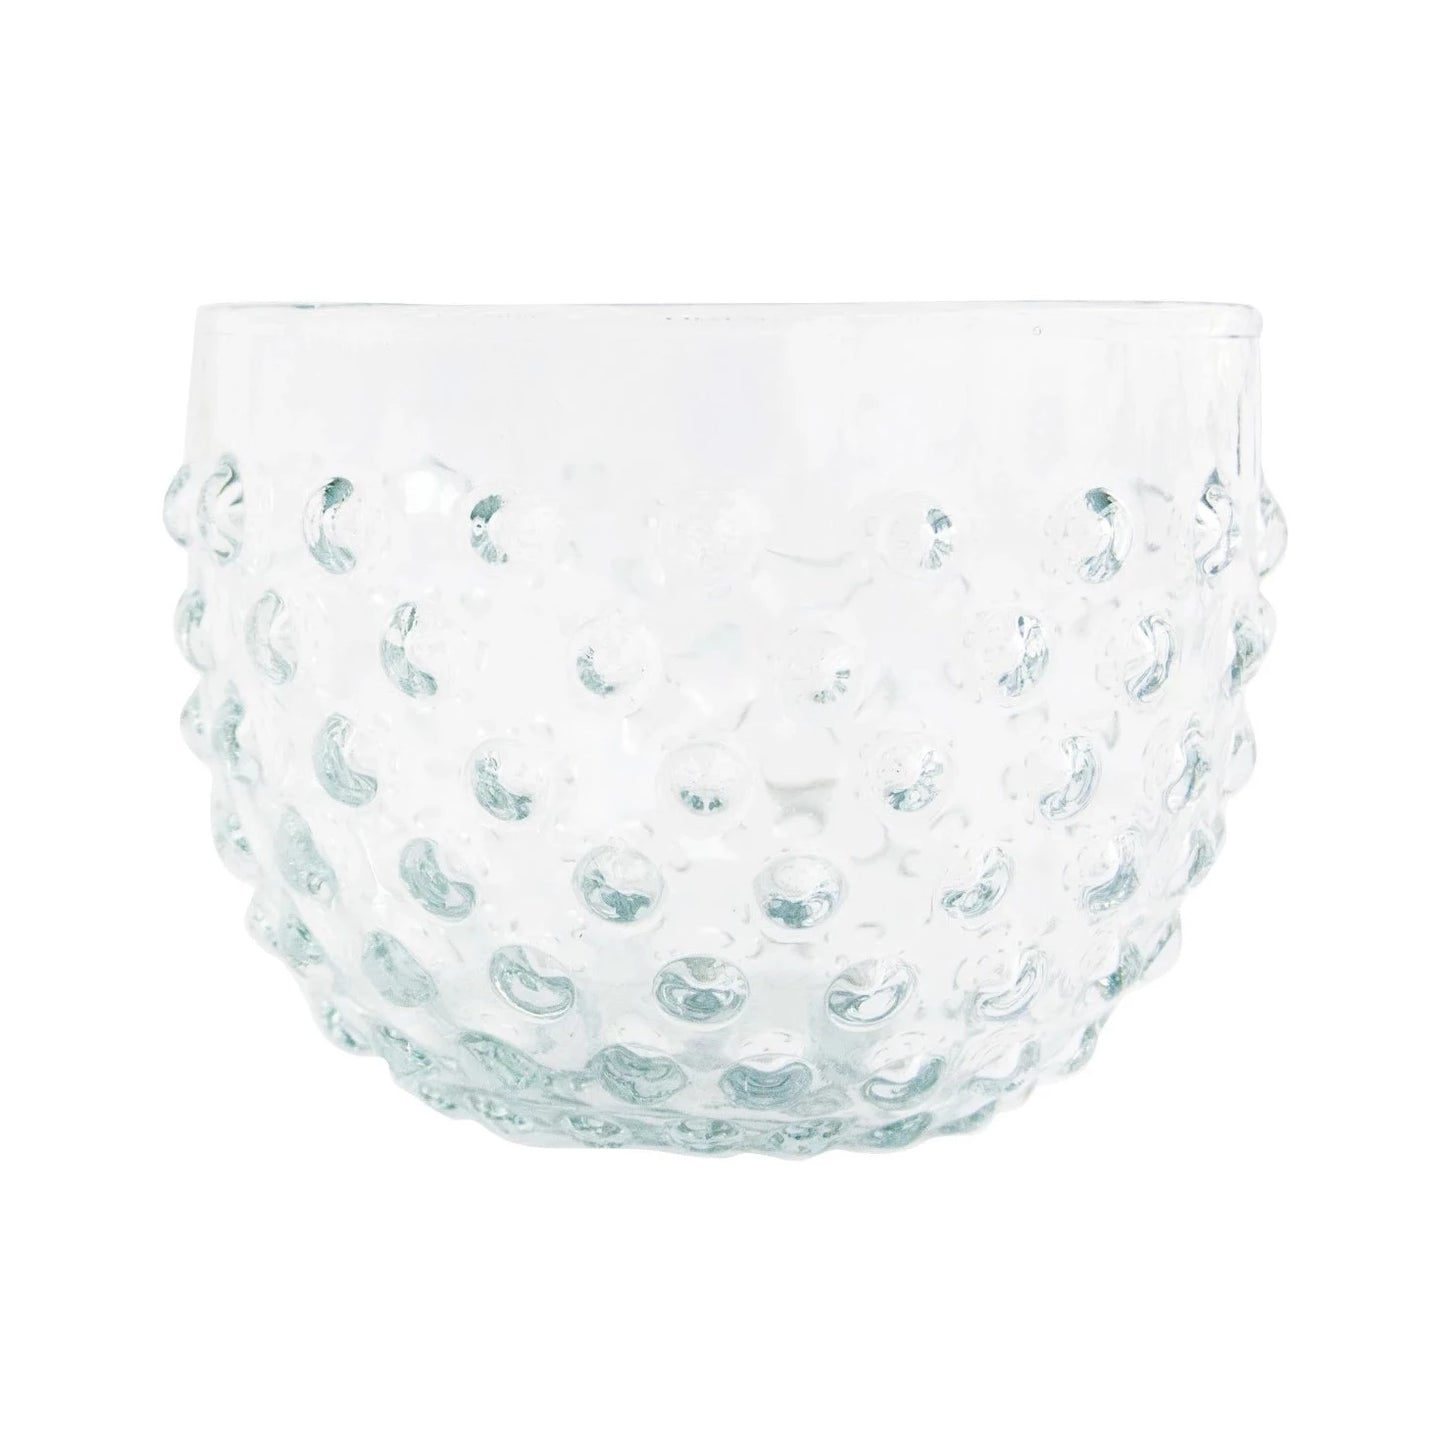 HOBNAIL GLASS COLLECTION